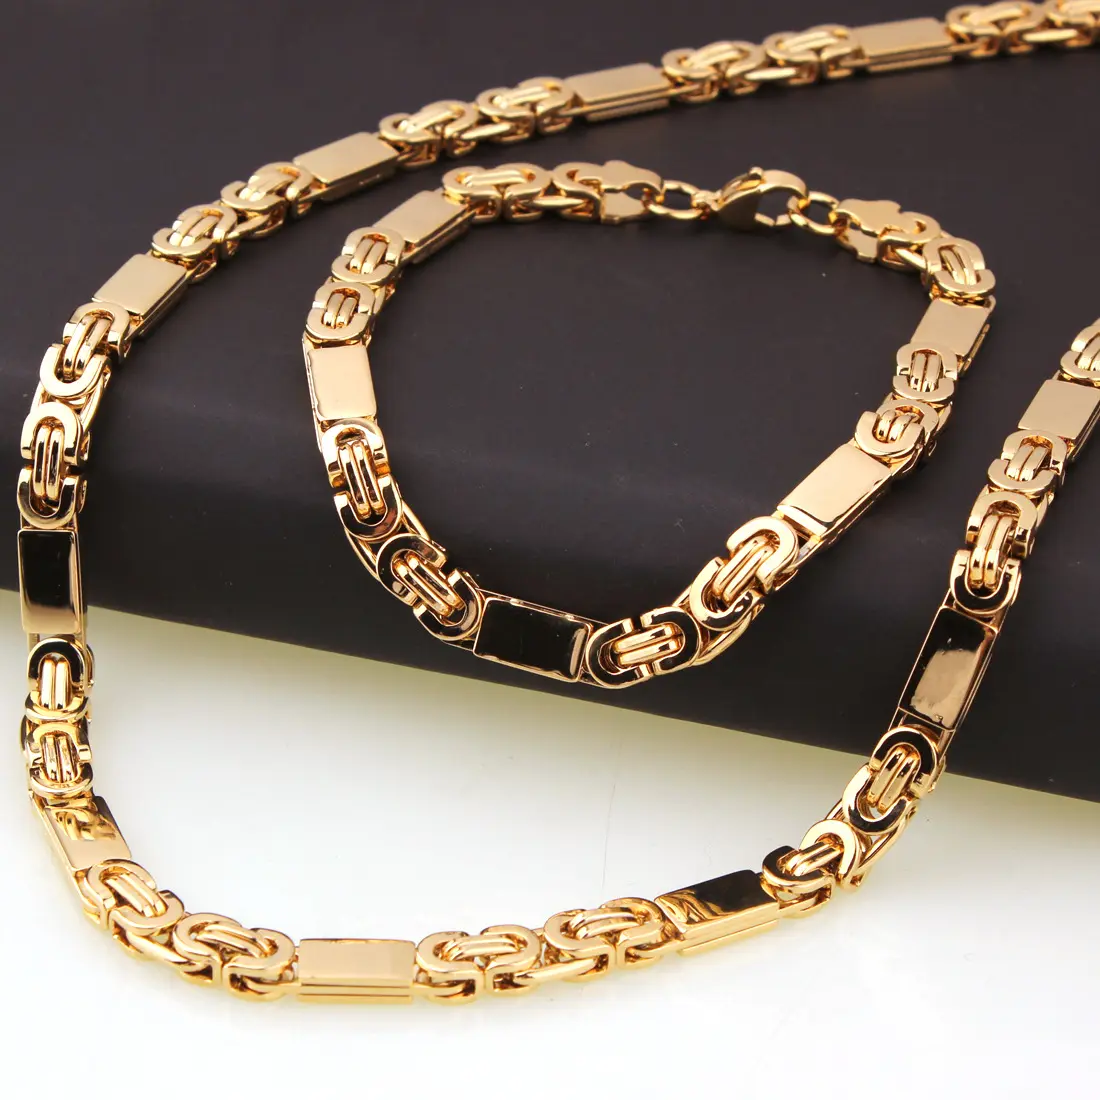 Hifive fashion luxury jewelry Gold Plating Figaro Chain Men's Stainless Steel Italian Solid Necklace & Bracelet Set